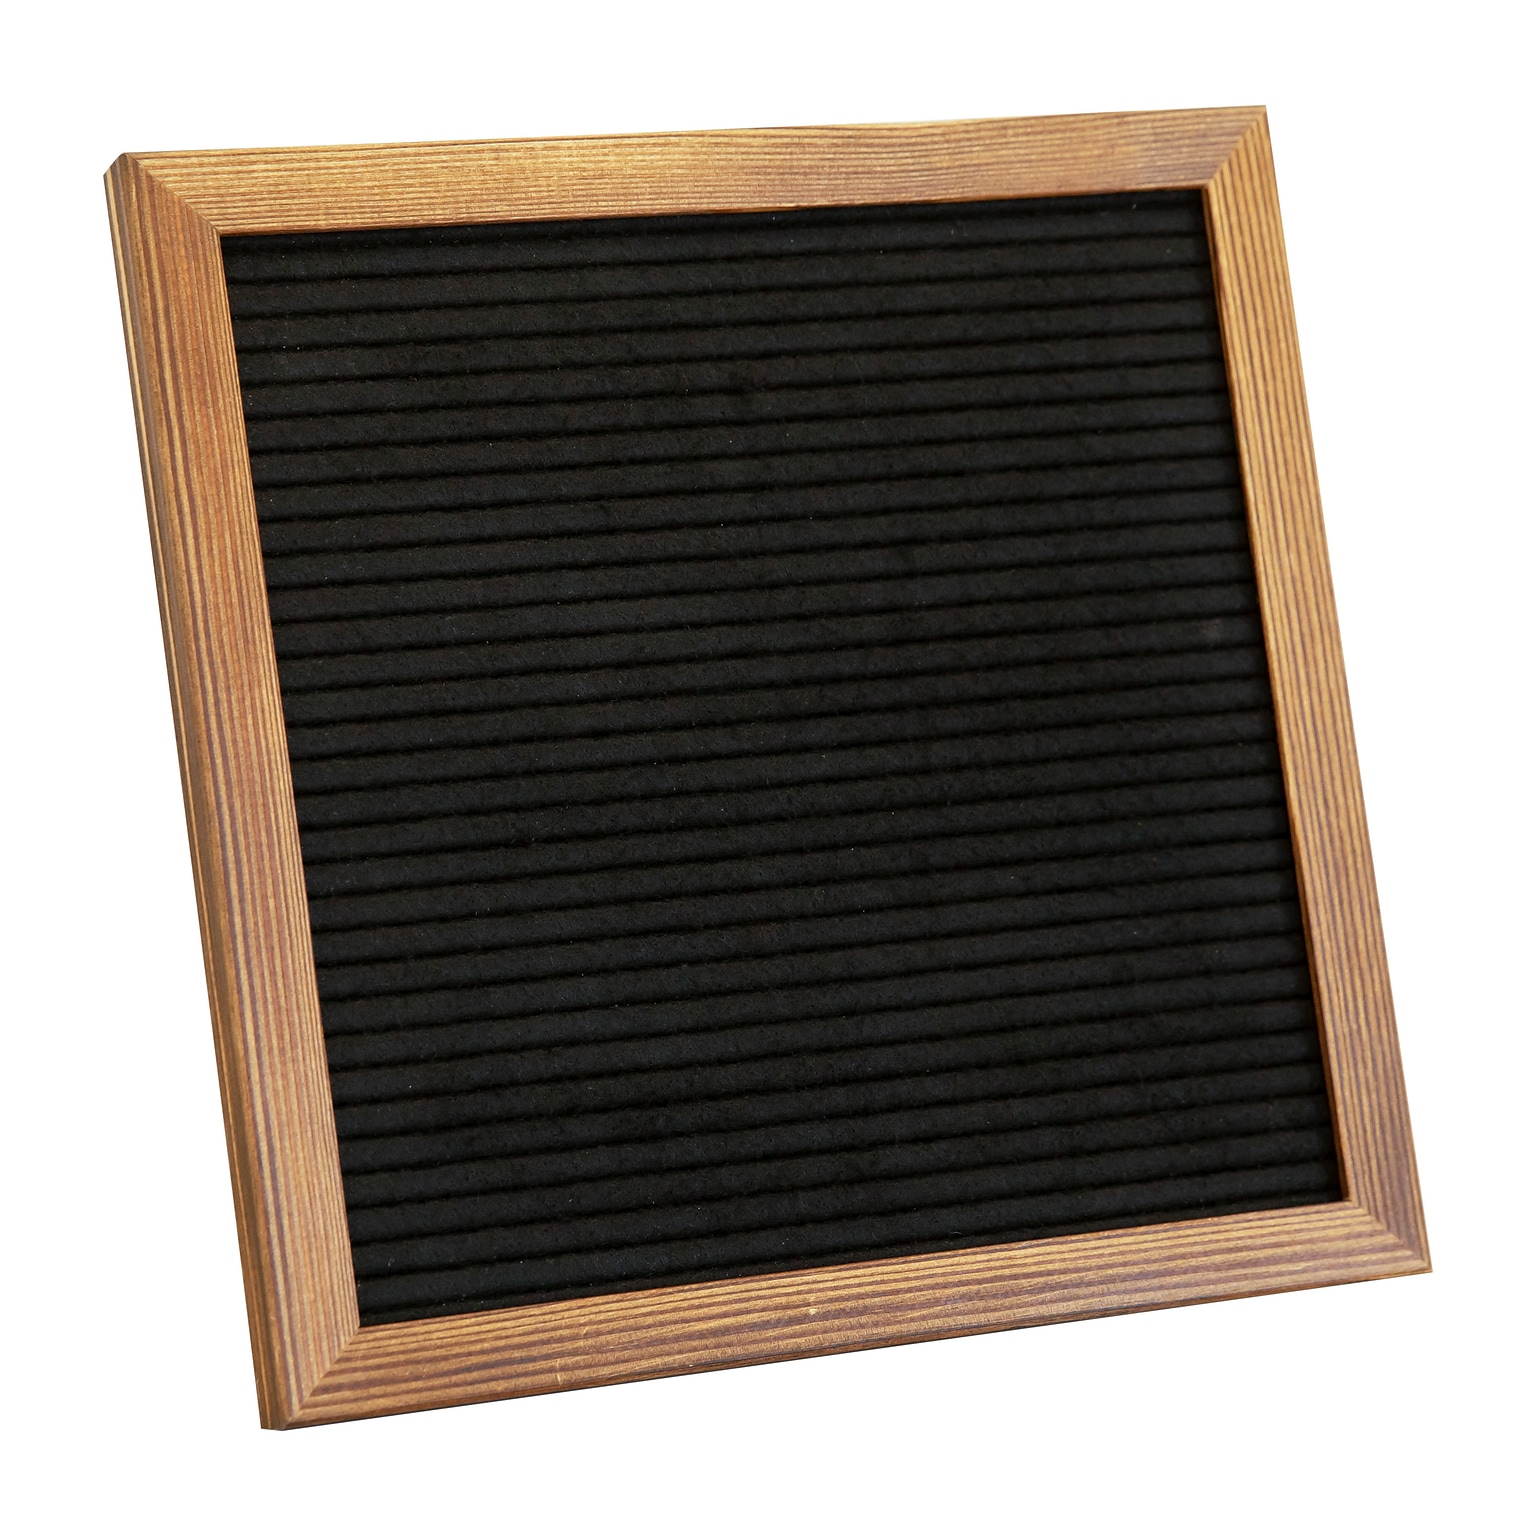 Flash Furniture Gracie Felt Letter Board with Letters, 10 x 10, Torched Wood/Black Felt (HGWAFB10TORCH)